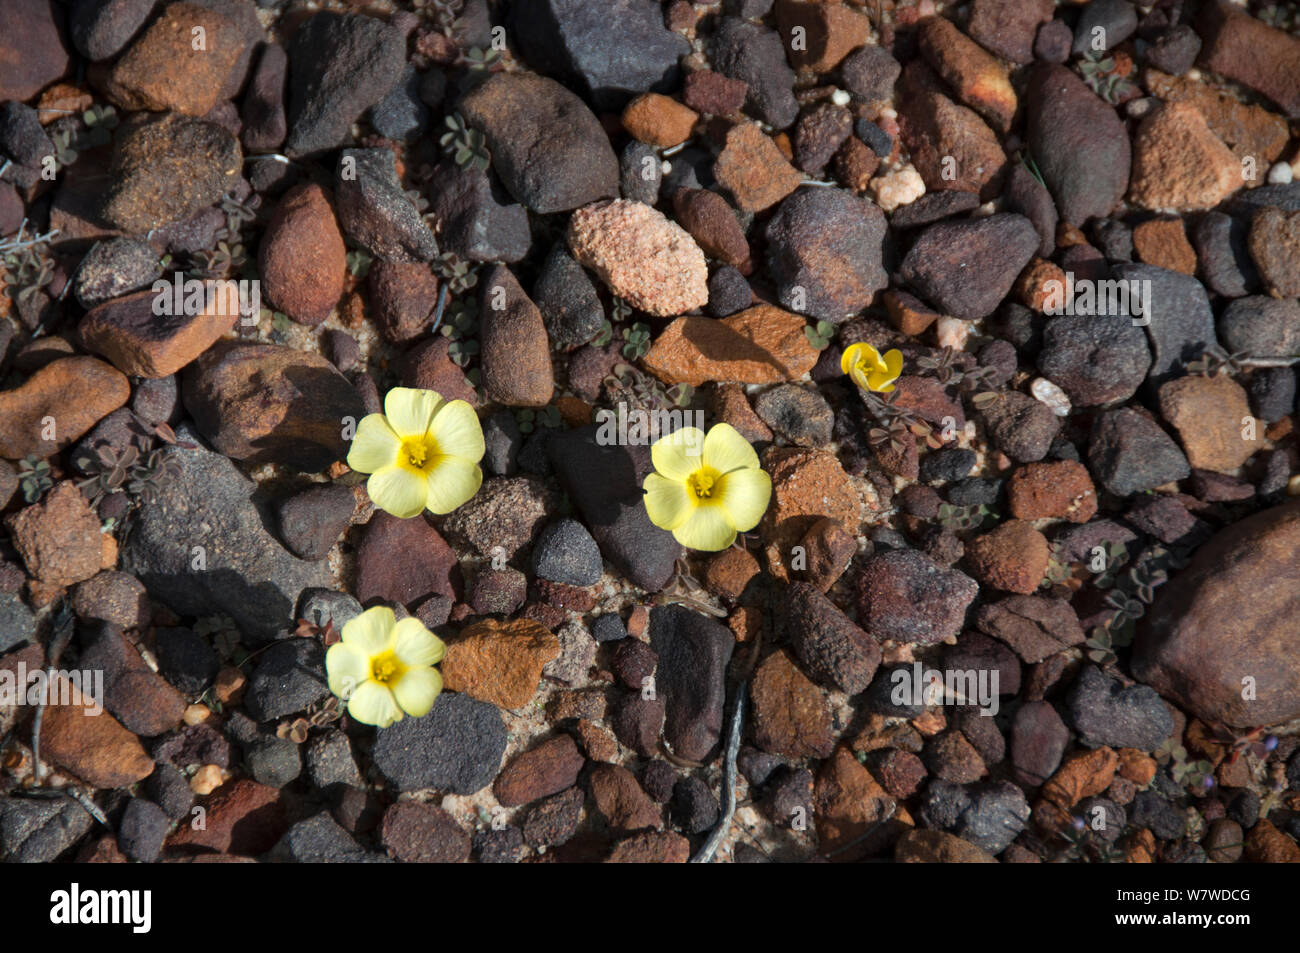 Three Bermuda buttercups (Oxalis pes caprae) in flower, Namaqualand, South Africa, August. Stock Photo